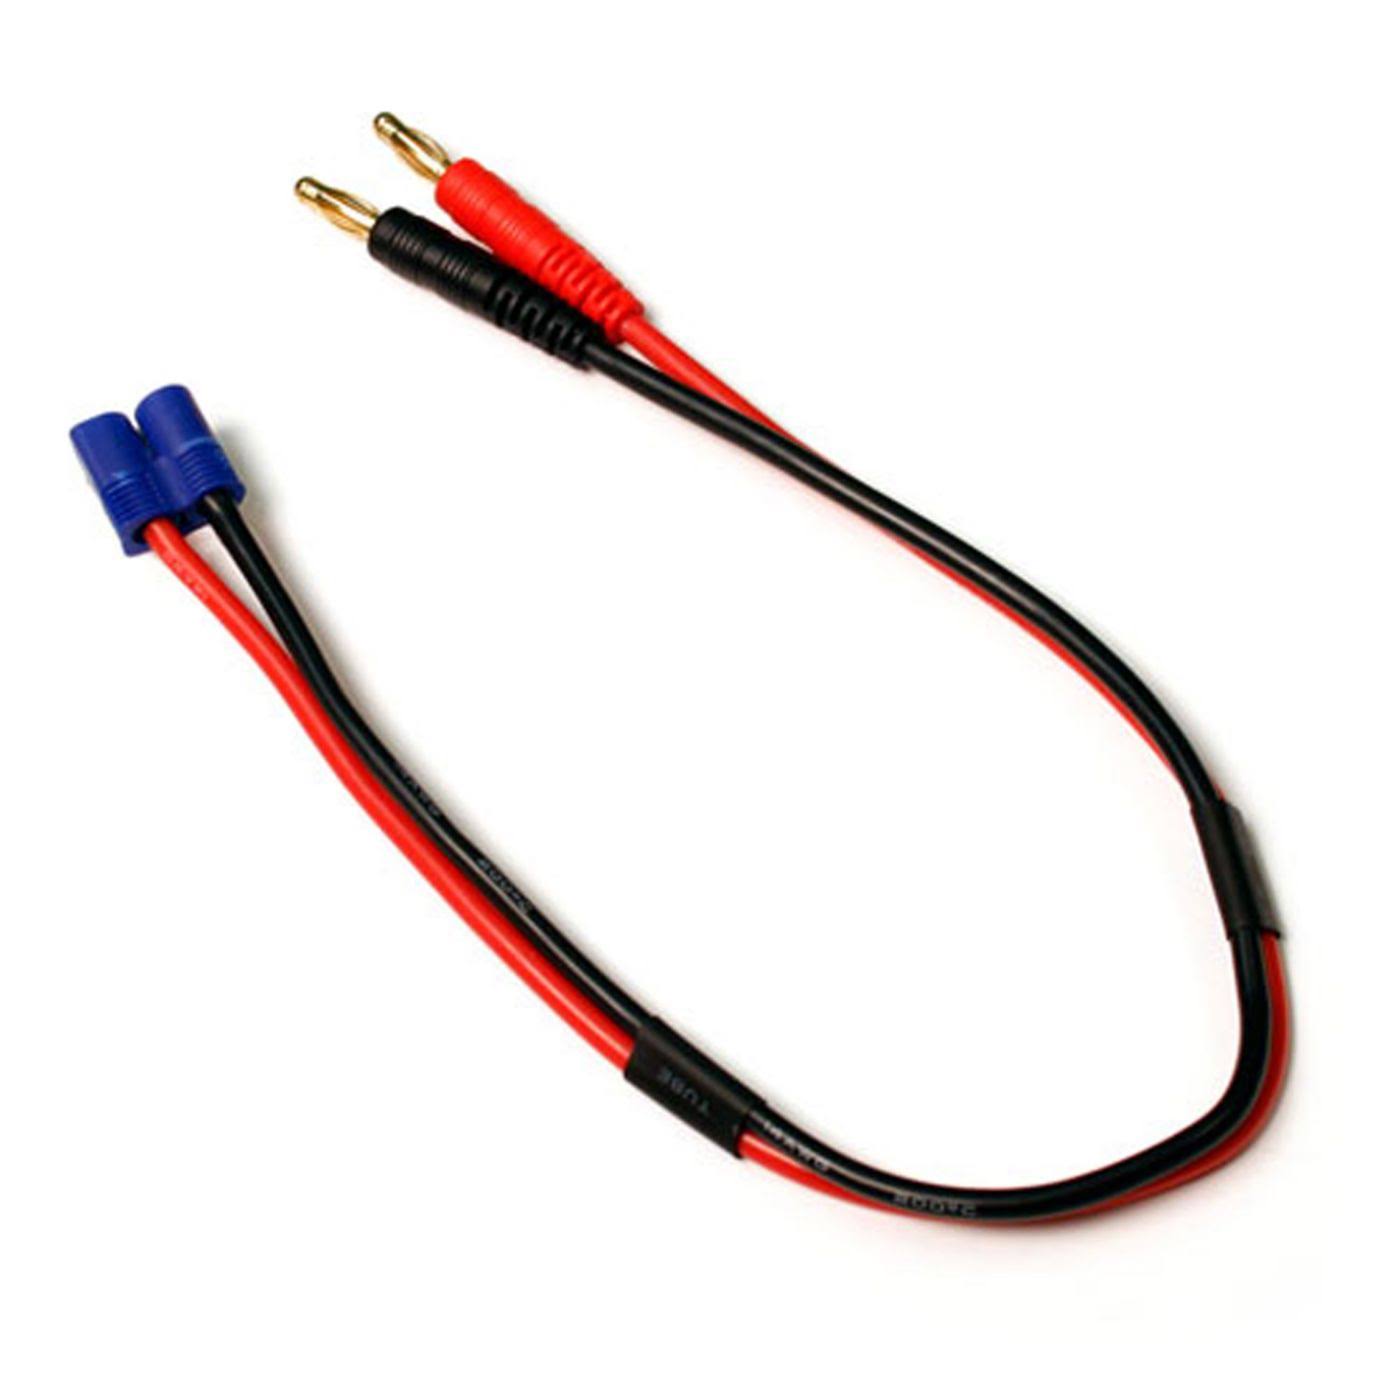 Venom EC3 Male to Charger Premium Adapter Plug - 14AWG